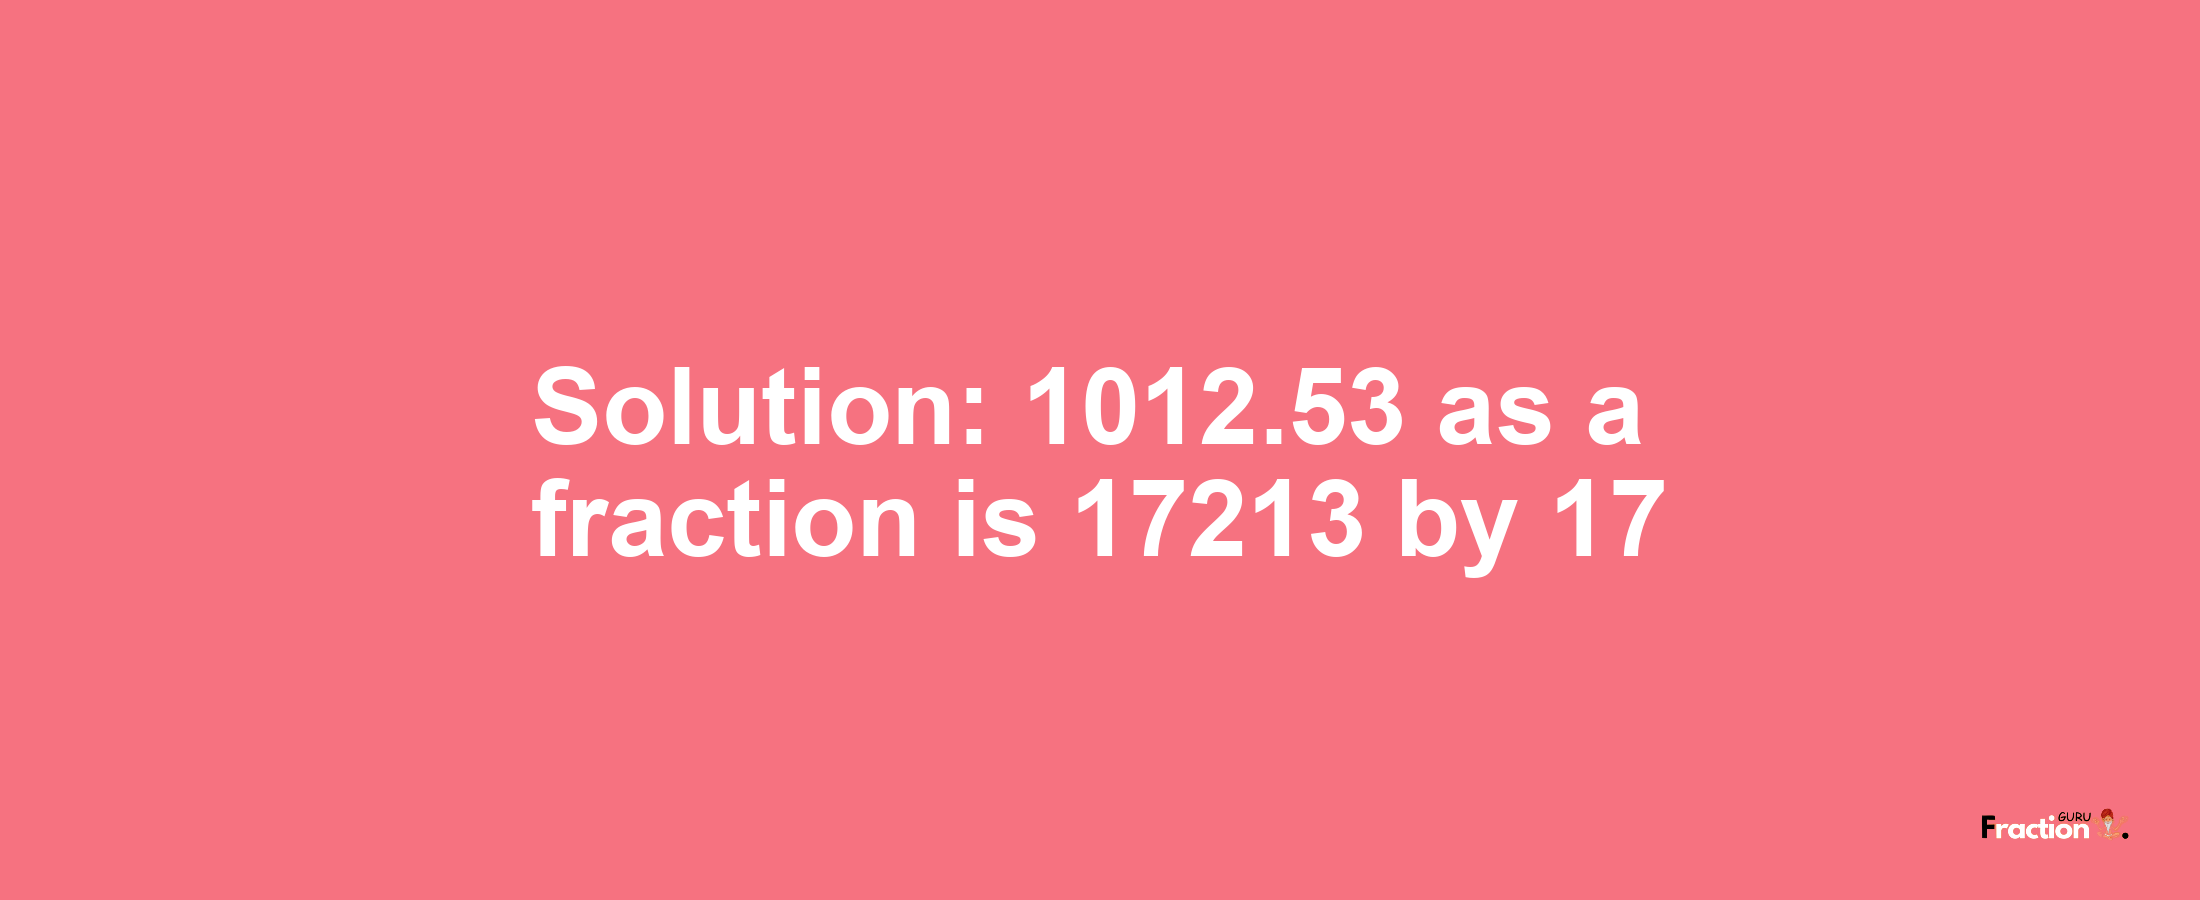 Solution:1012.53 as a fraction is 17213/17